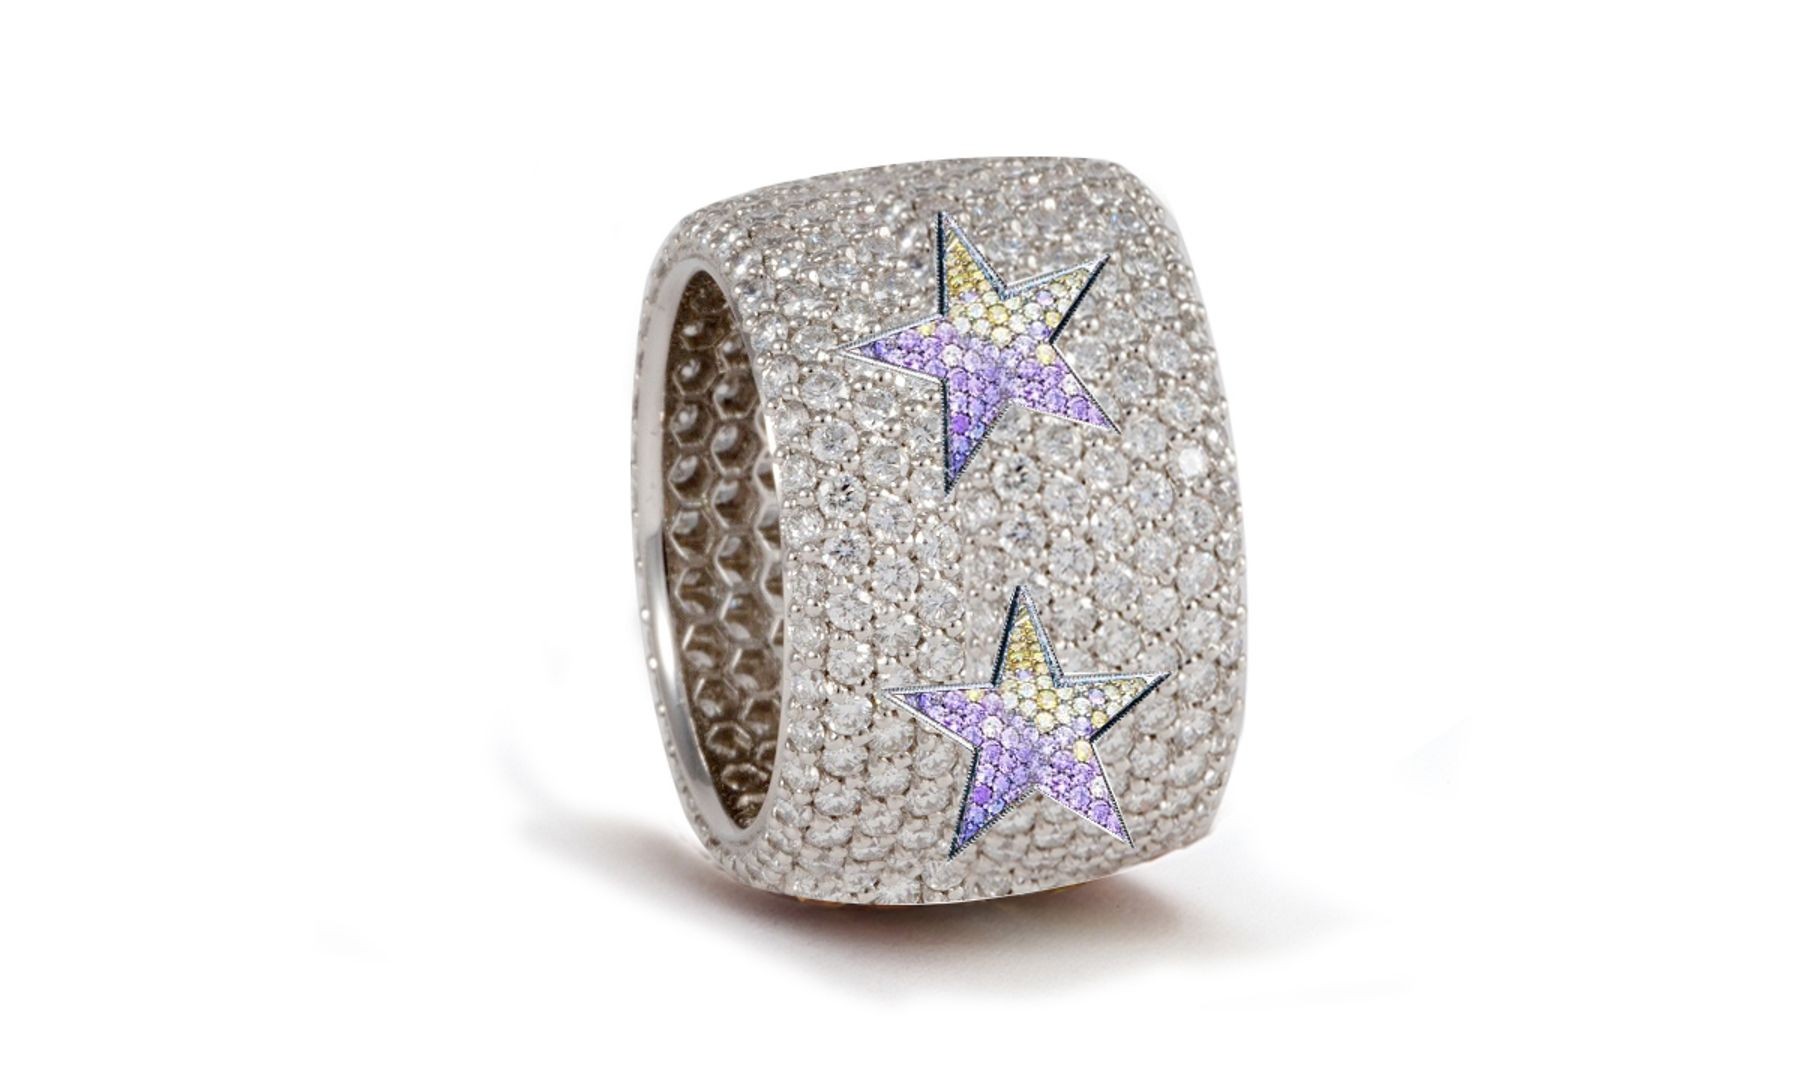 Delicate French pavee Sparkling Brilliant-Cut Round Diamonds & Vivid Multi-Colored Precious Stones Eternity Rings & Bands Featuring Celestial Stars